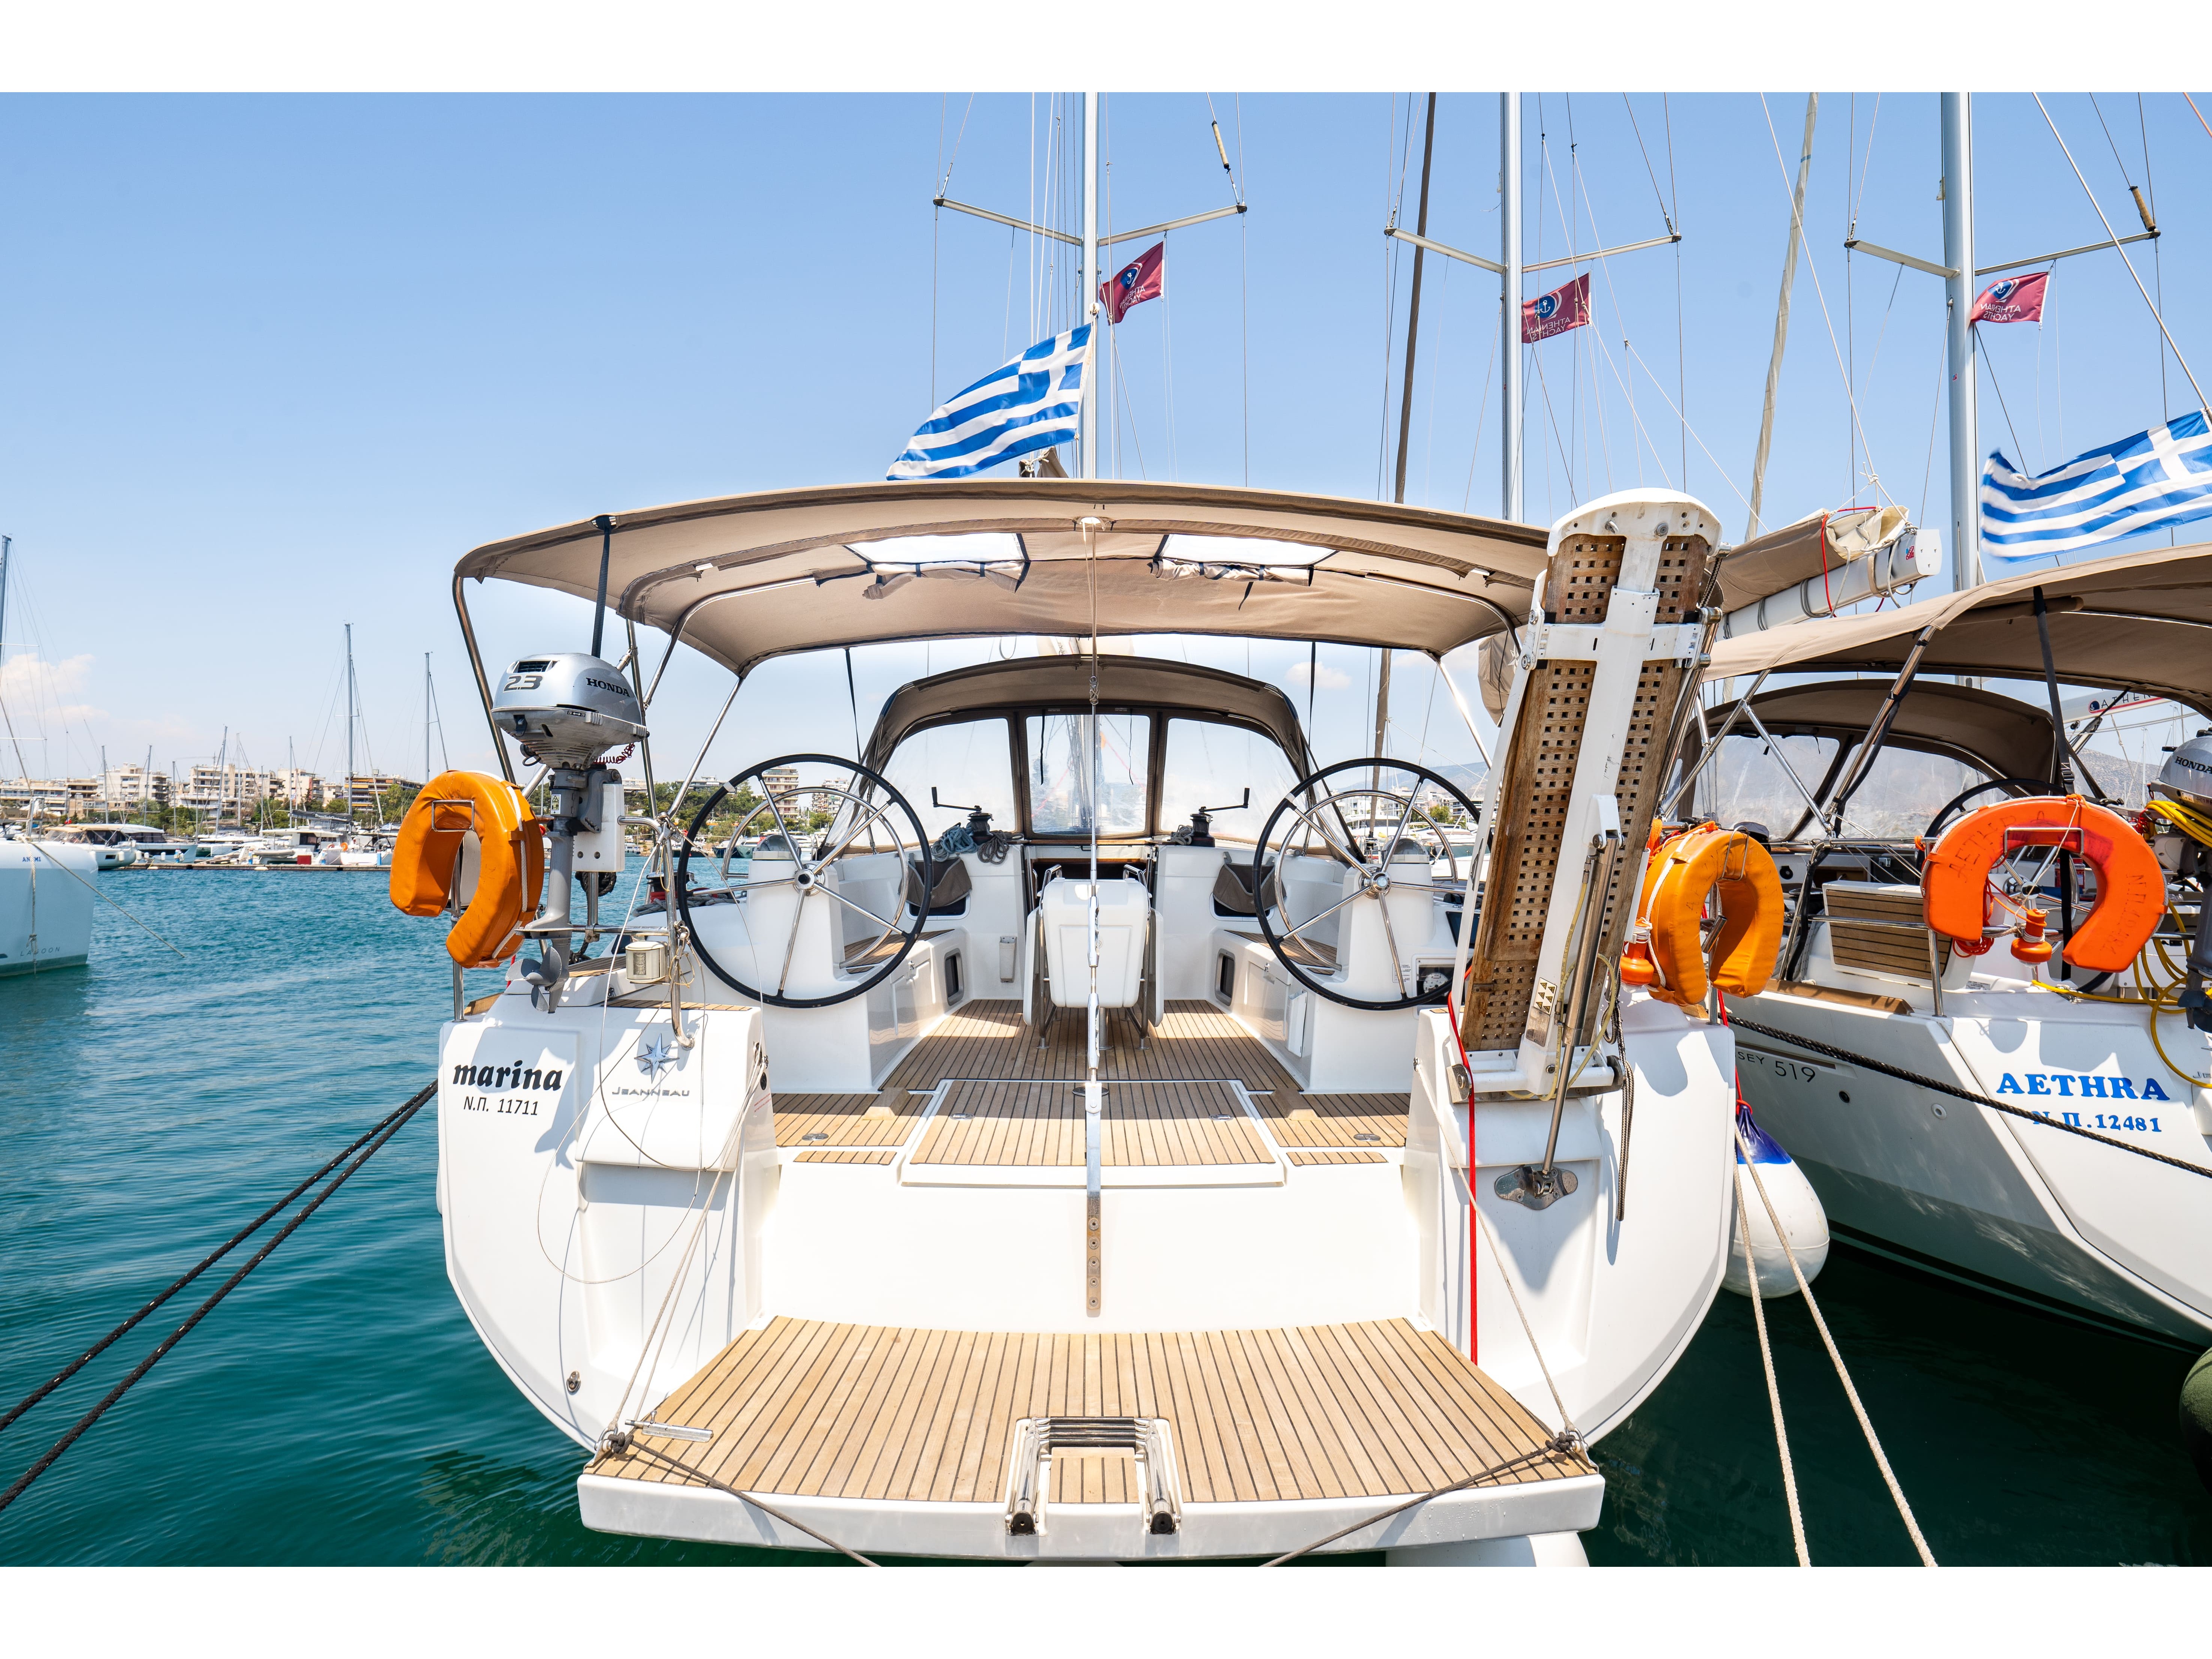 Sun Odyssey 519 - Sailboat Charter Greece & Boat hire in Greece Athens and Saronic Gulf Athens Alimos Alimos Marina 4